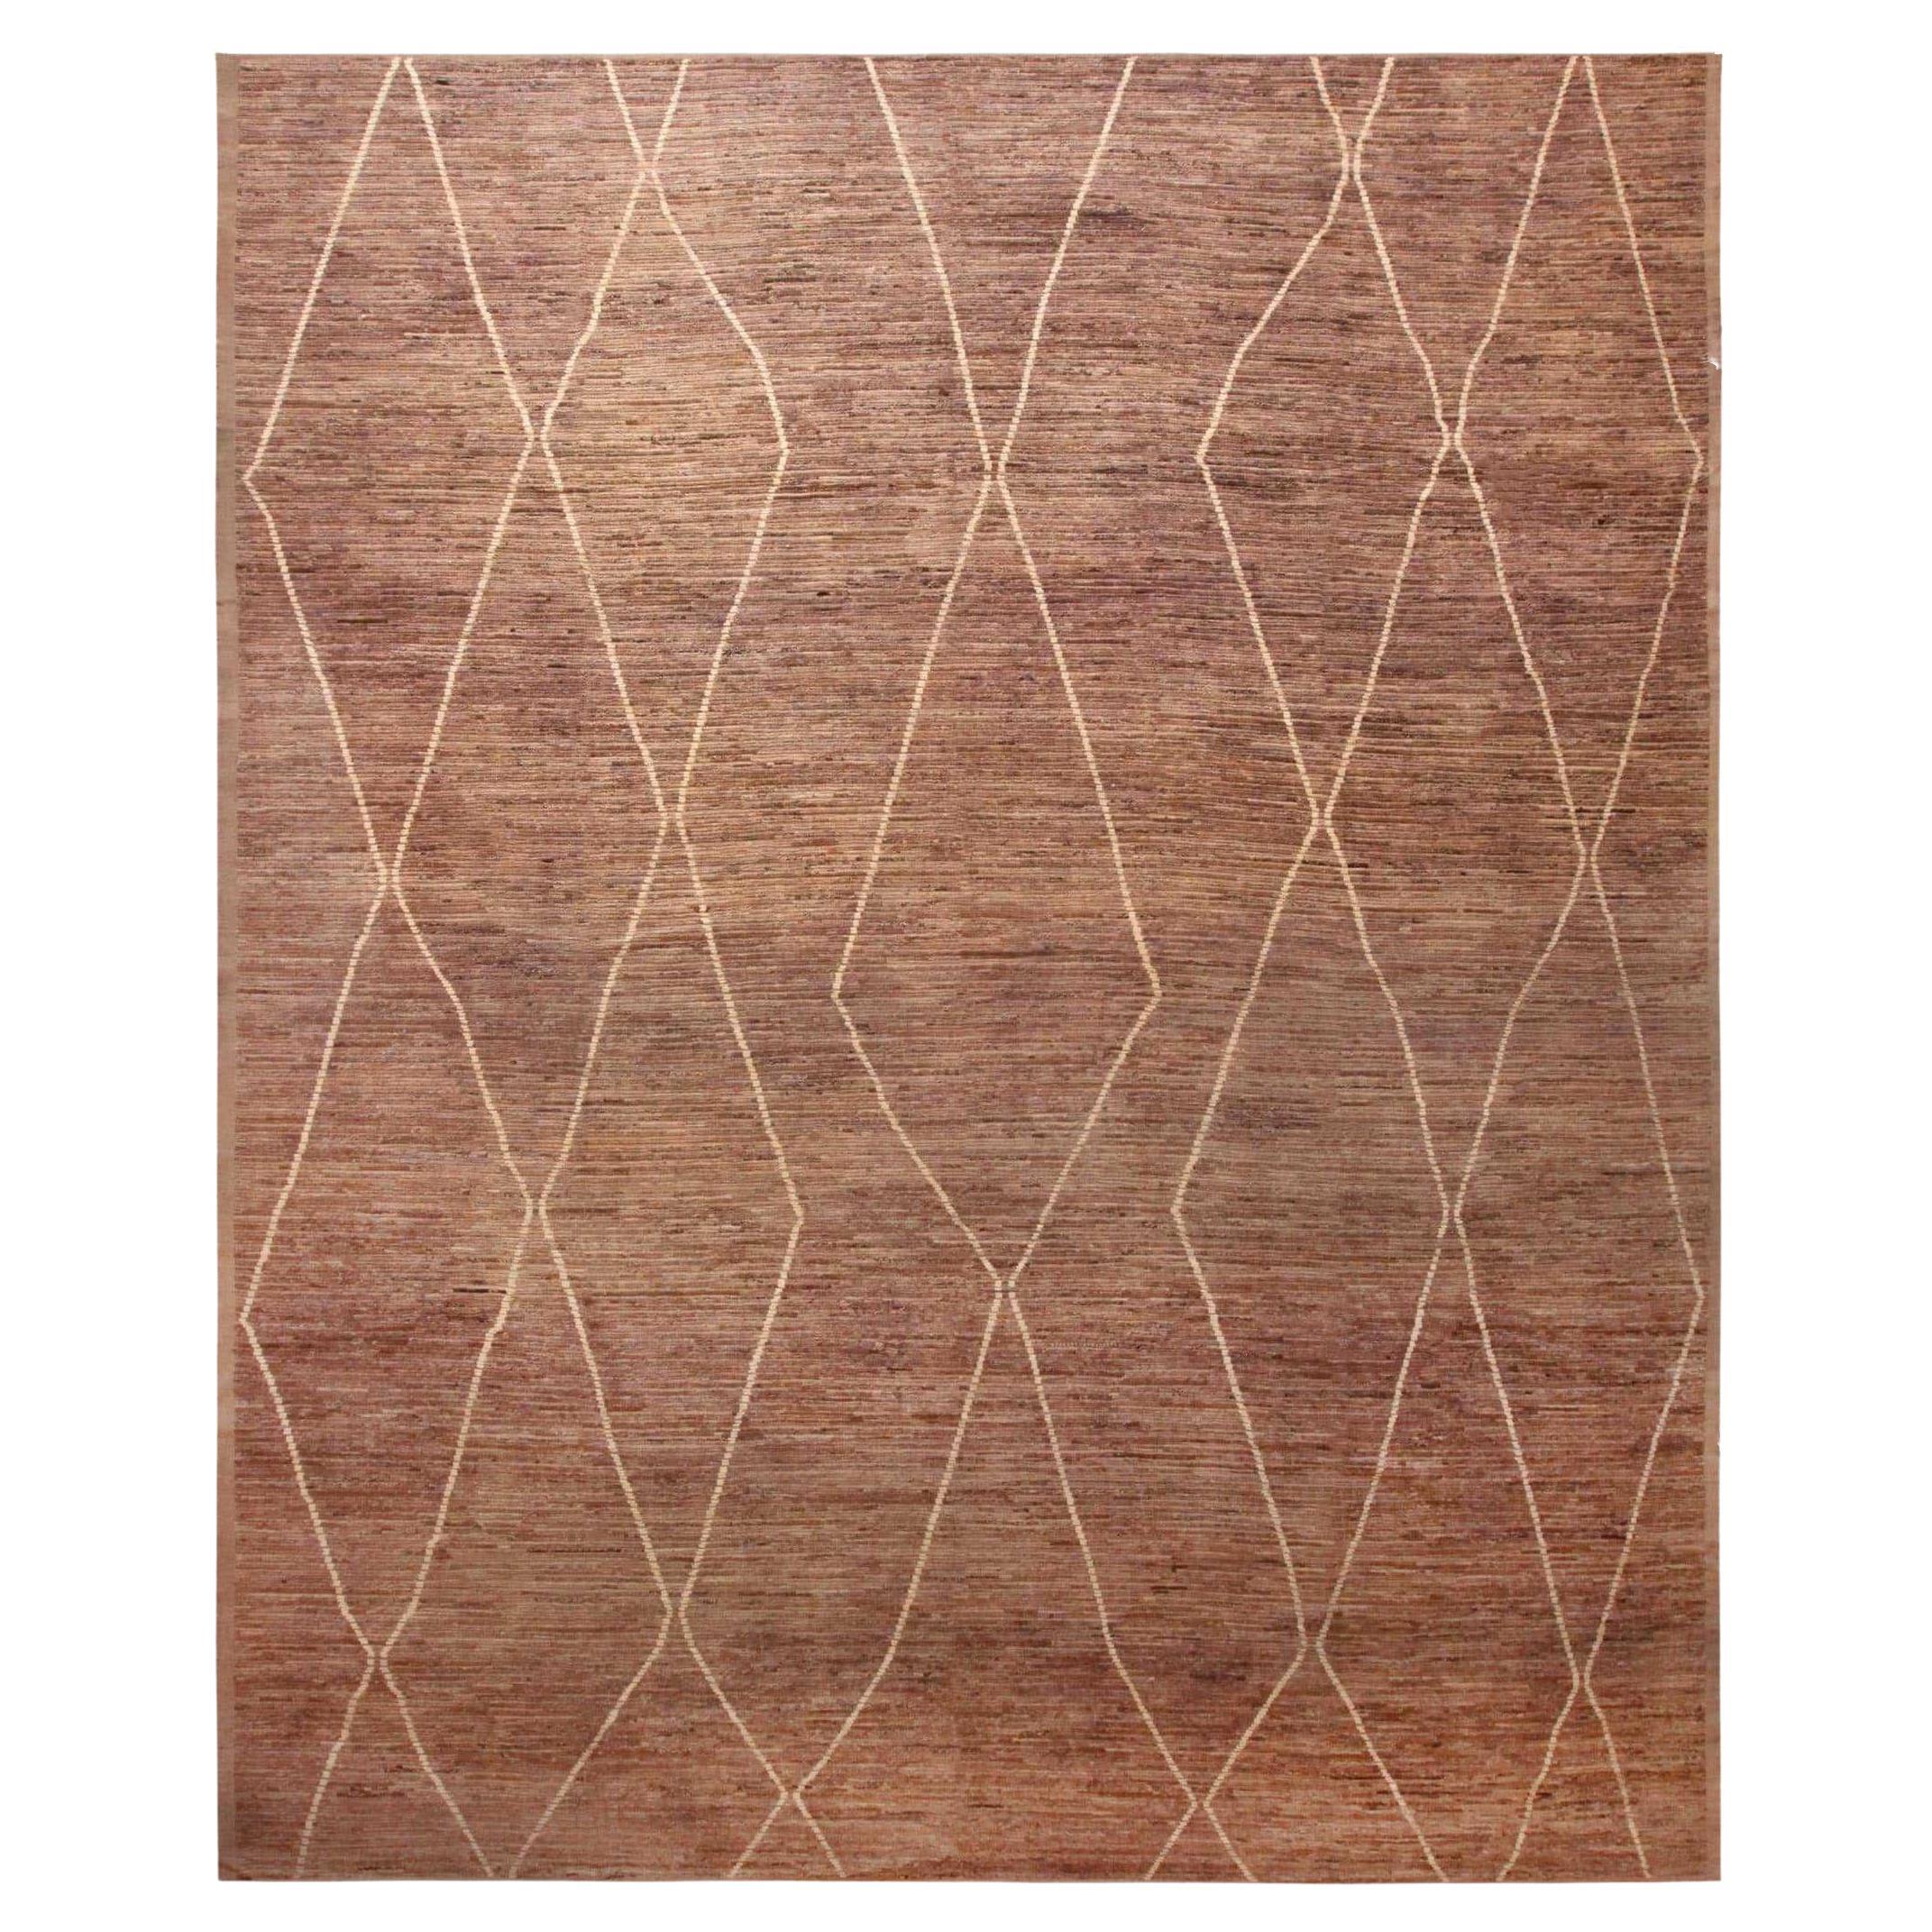 Nazmiyal Collection Tribal Moroccan Style Contemporary Area Rug 13'2" x 15'8" For Sale